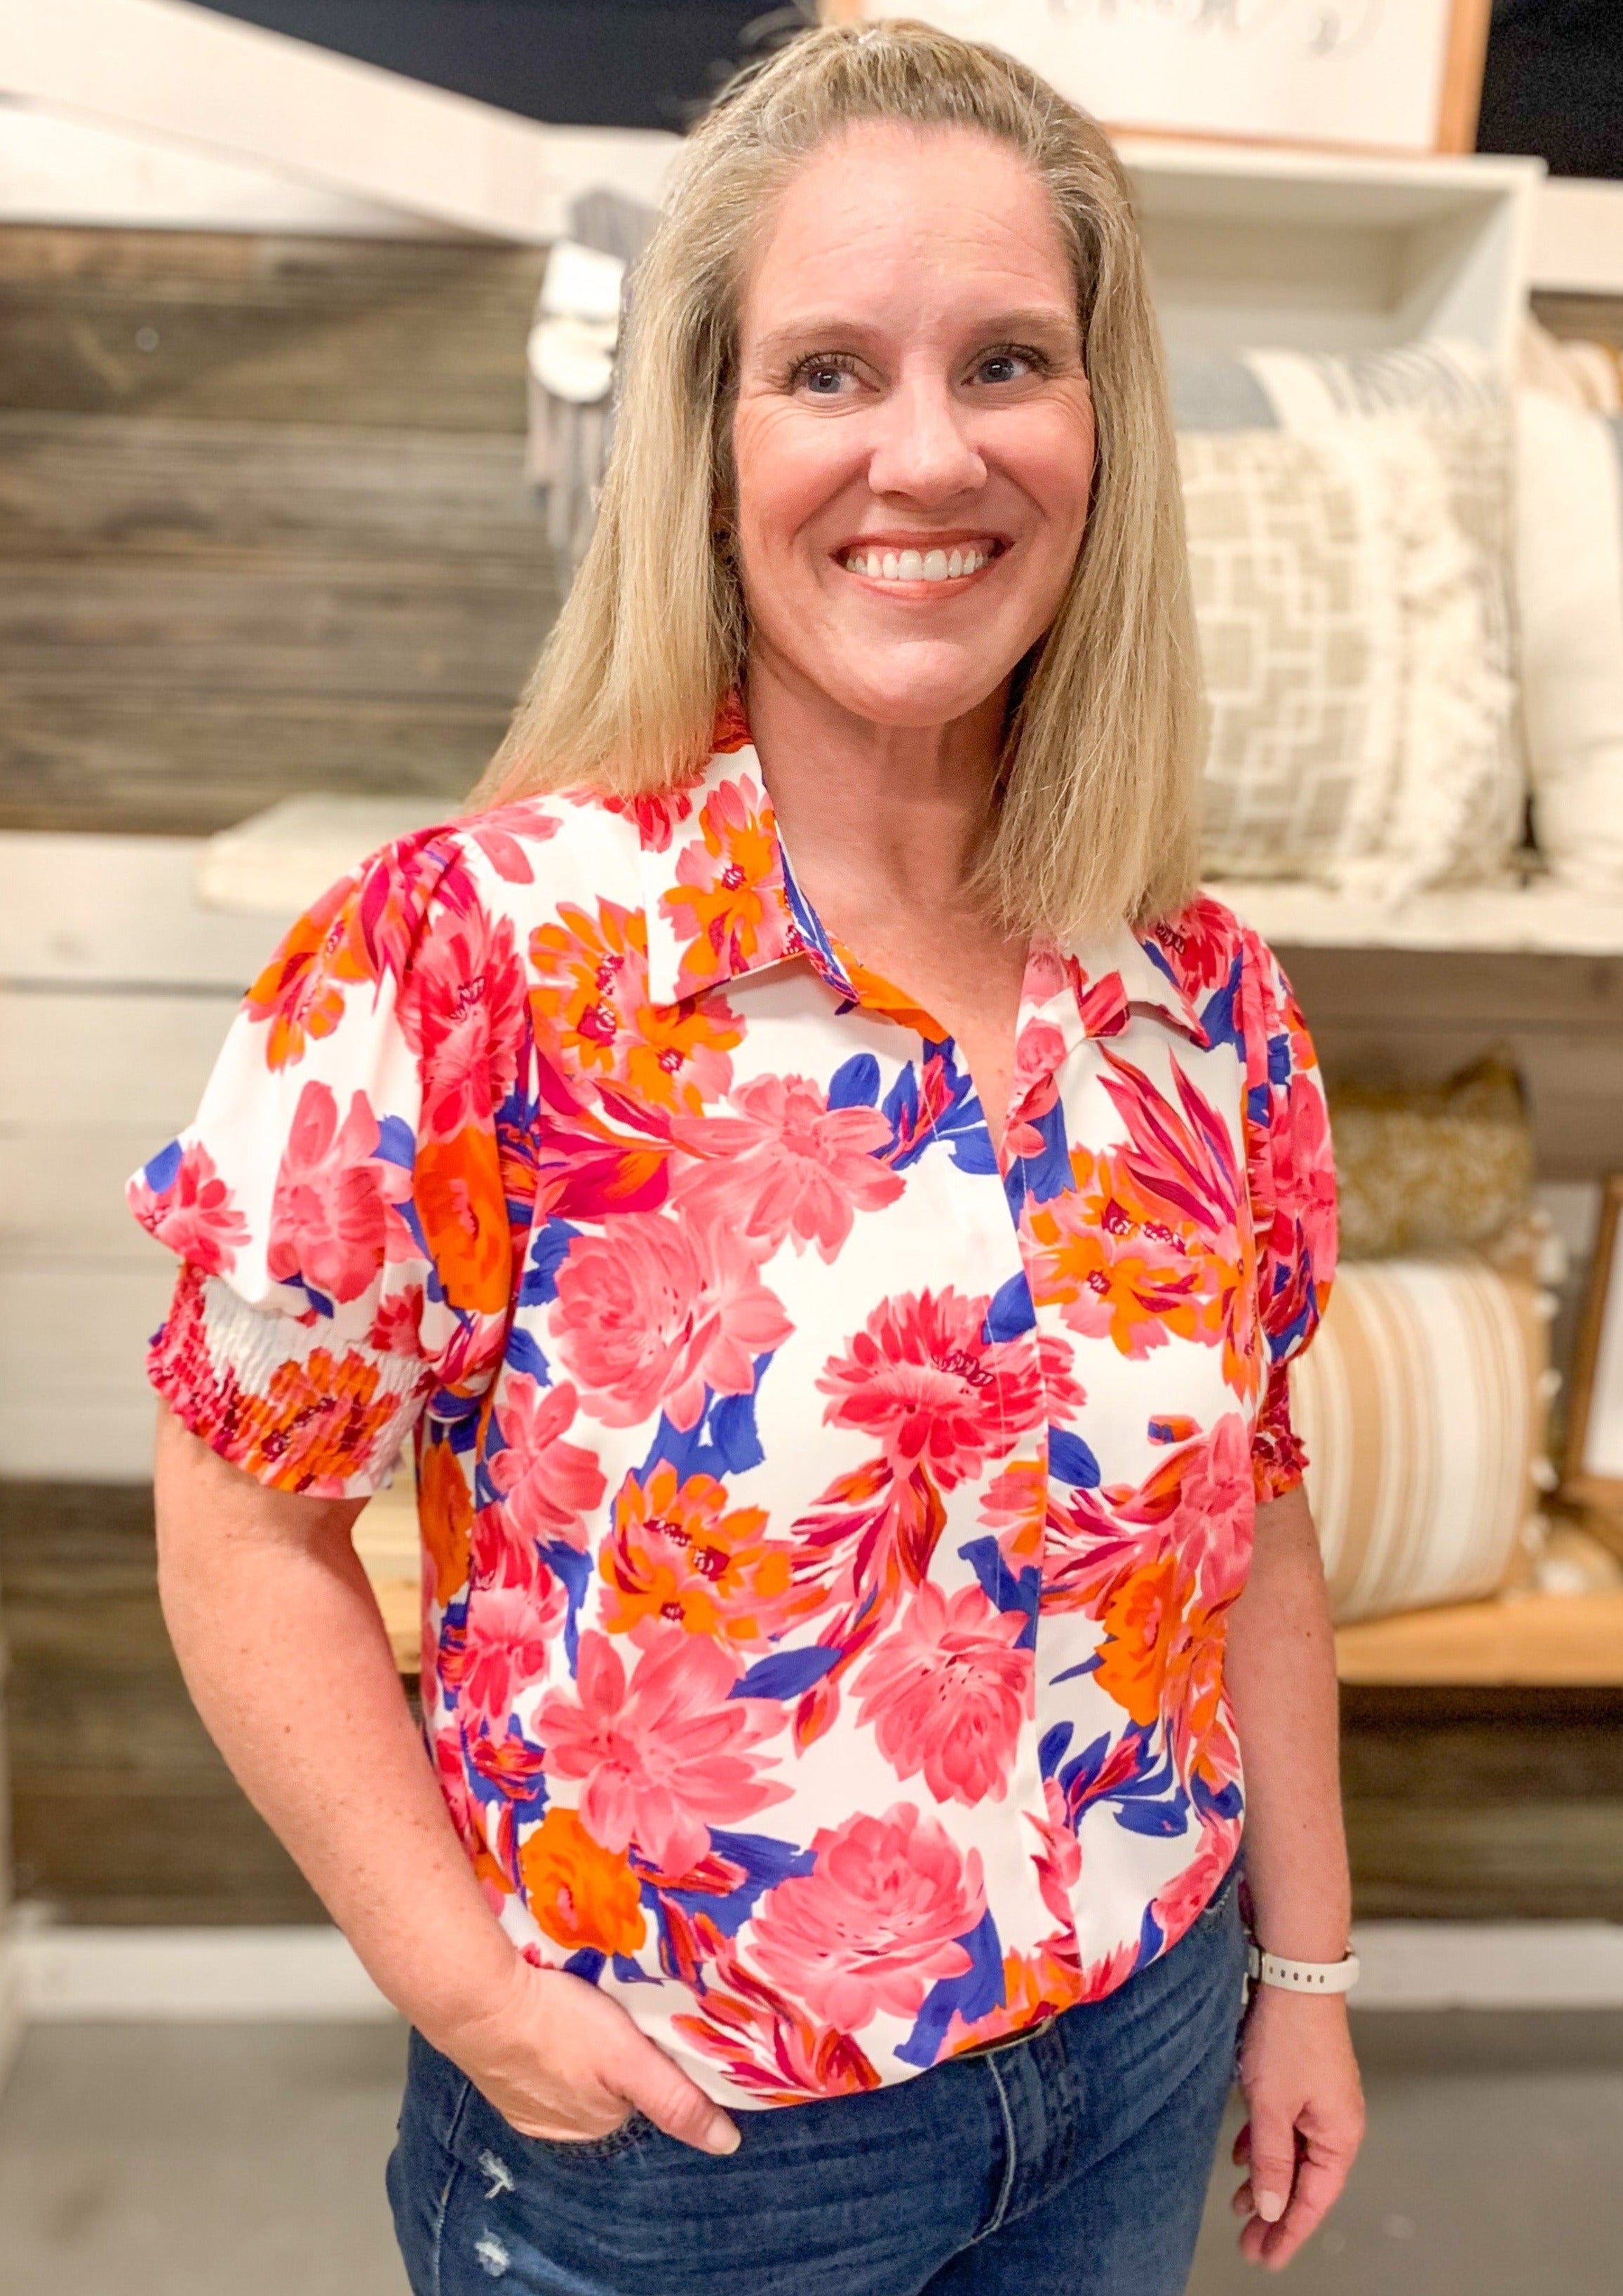 White top with V neckline, collar, and seem down the middle. Floral pattern is made up of Fuchsia, orange, and blue.